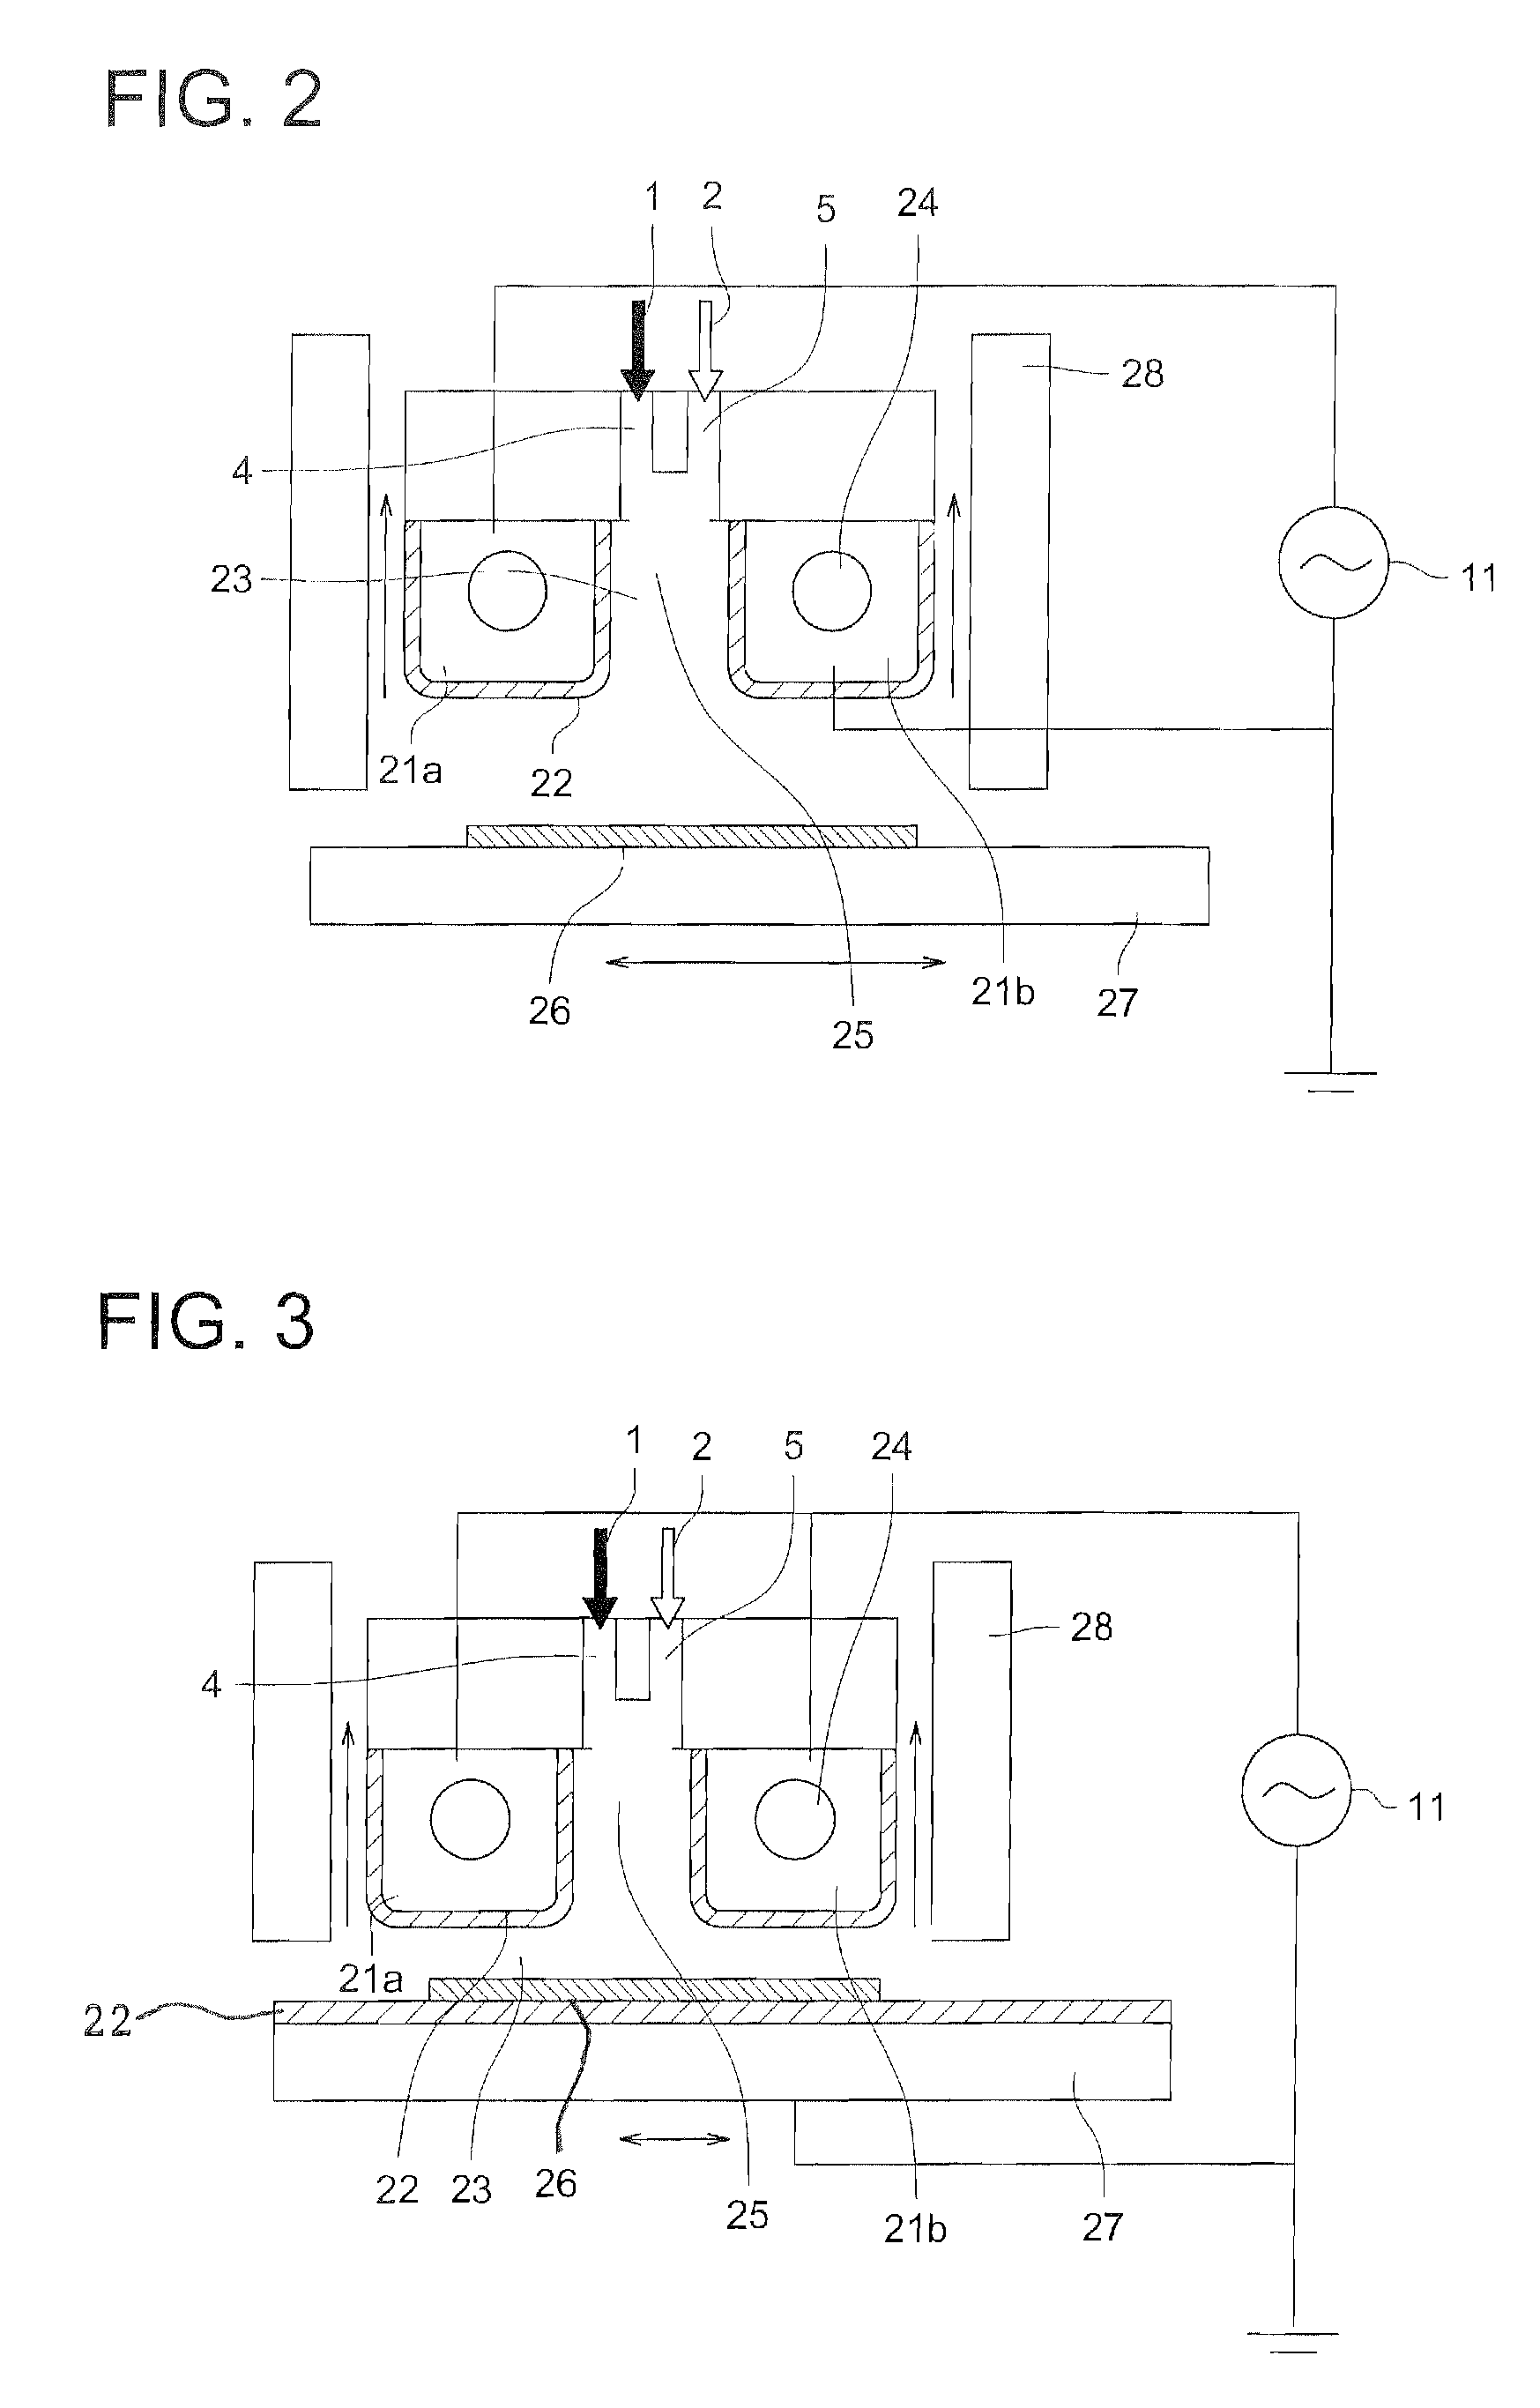 Method for forming nanostructured carbons, nanostructured carbons and a substrate having nanostructured carbons formed thereby